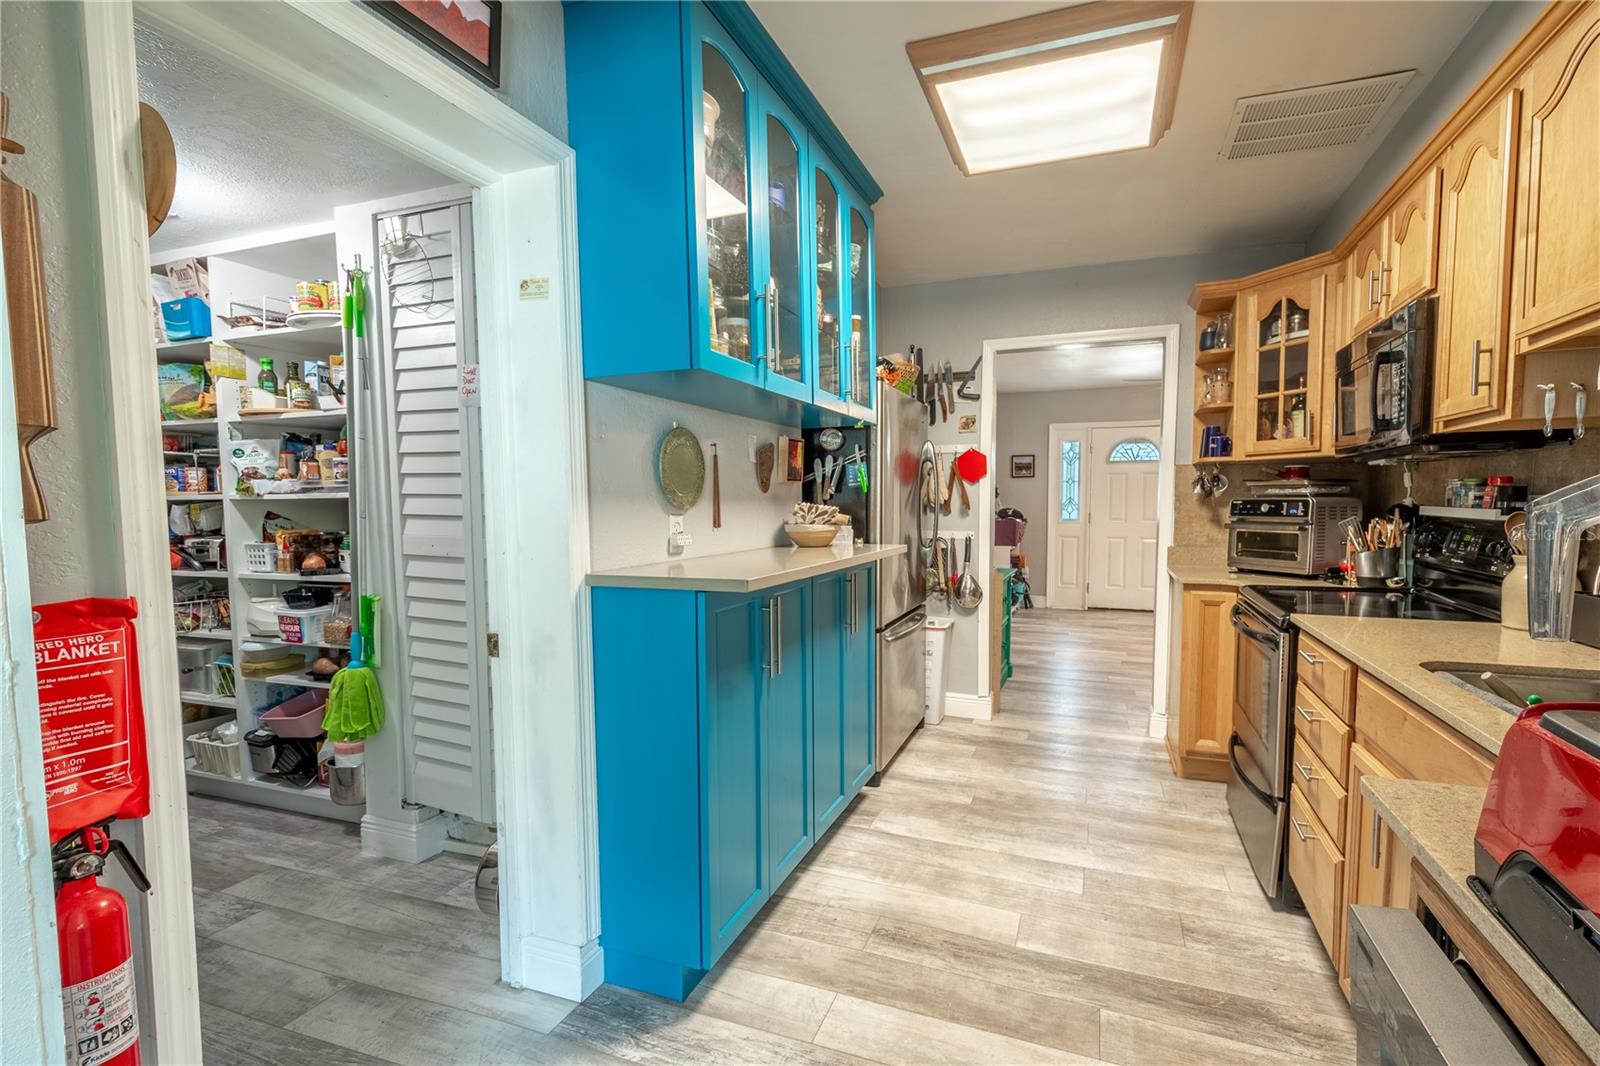 The kitchen features luxury vinyl floors, and a built-in buffet.